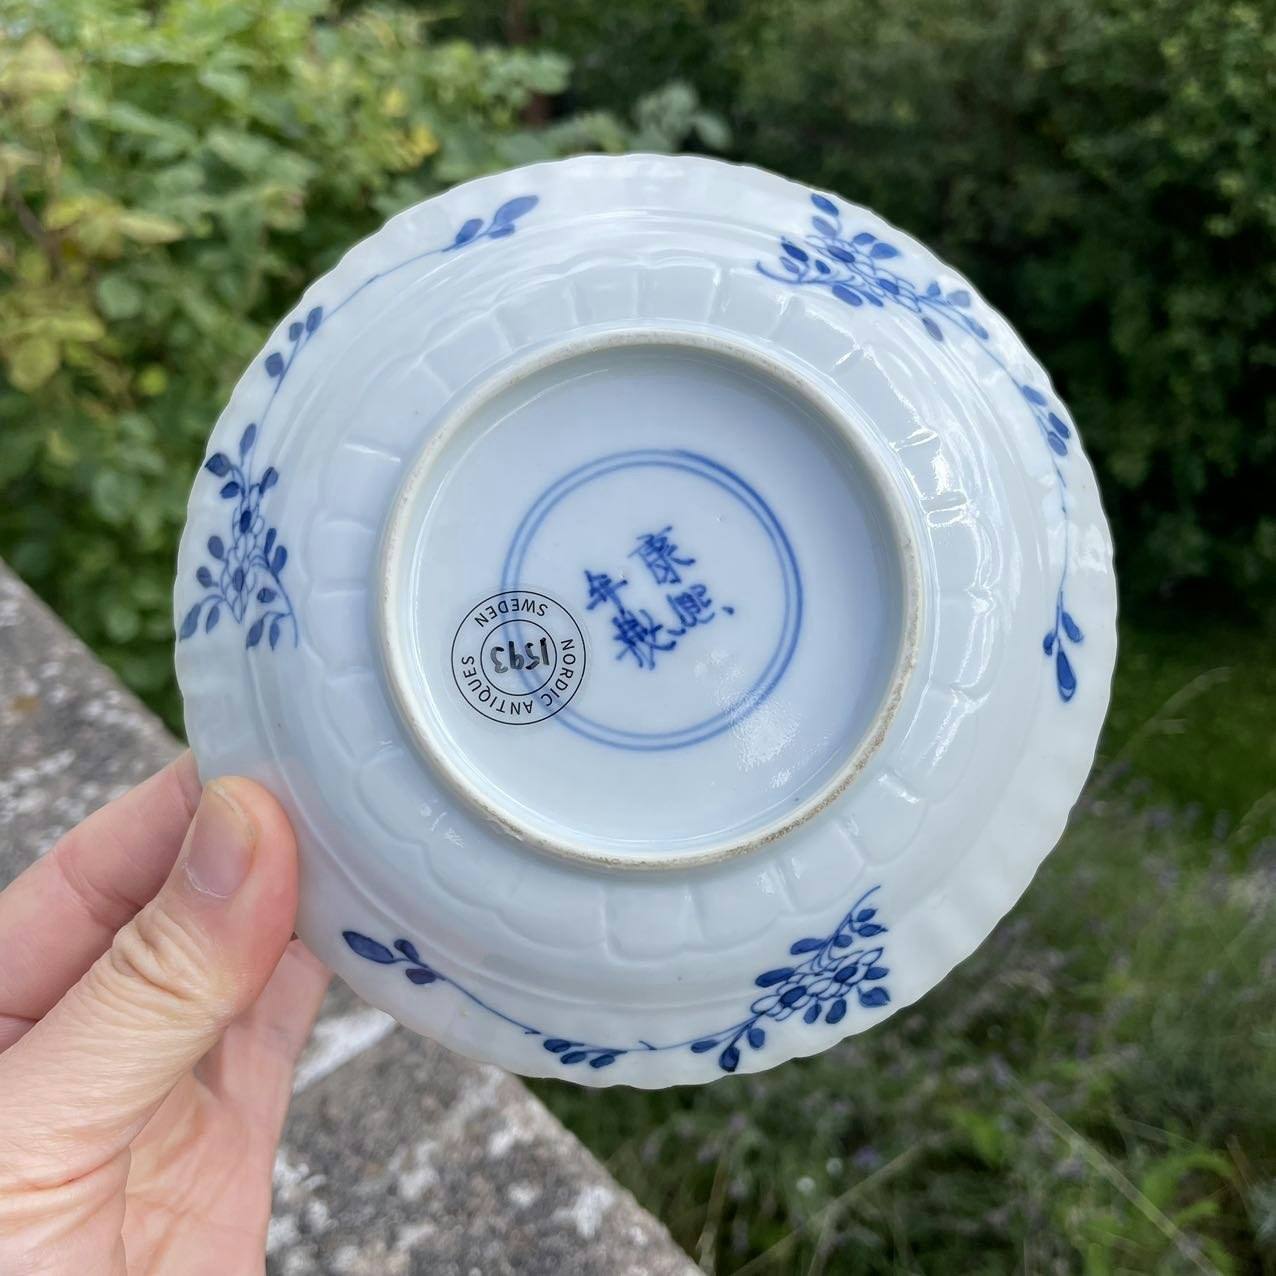 Chinese antique teacup and saucer decorated in underglazed blue with fishes and crabs, Kangxi Revival #1593